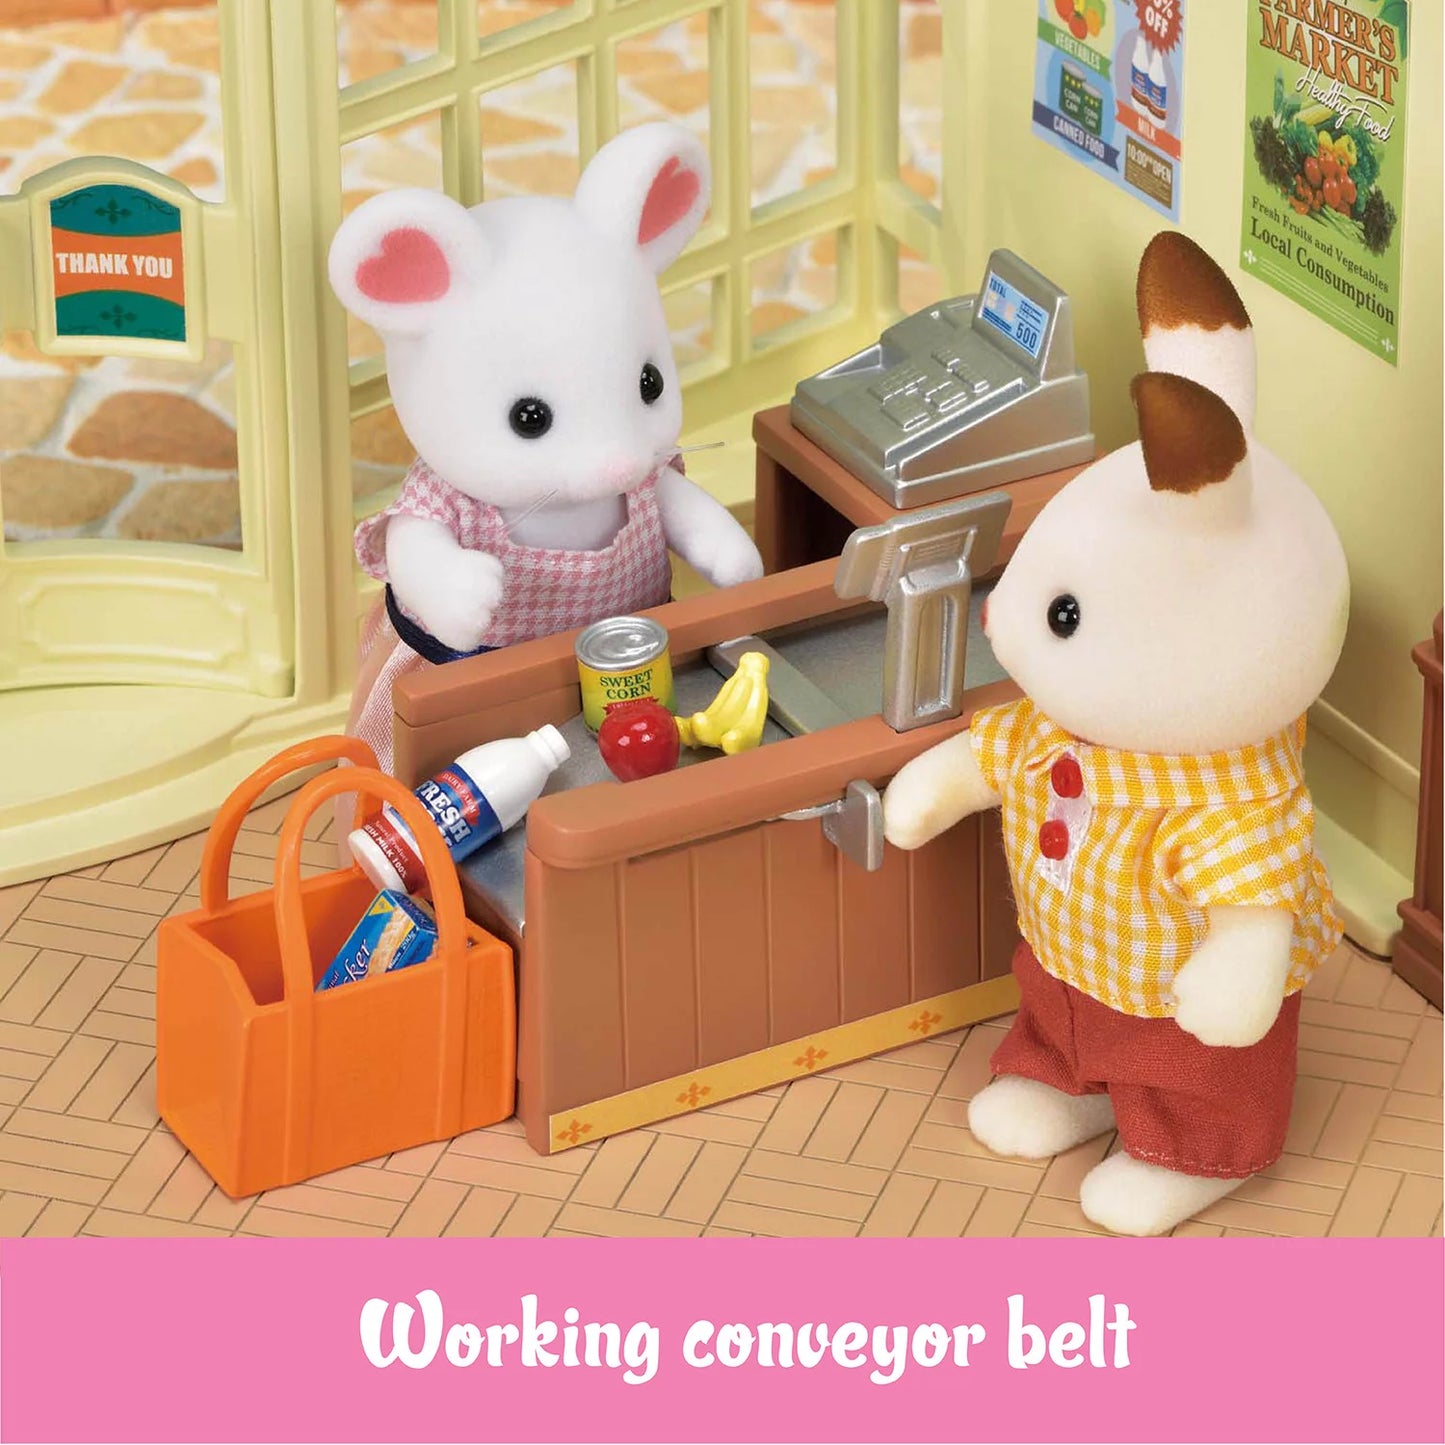 CALICO CRITTERS GROCERY MARKET